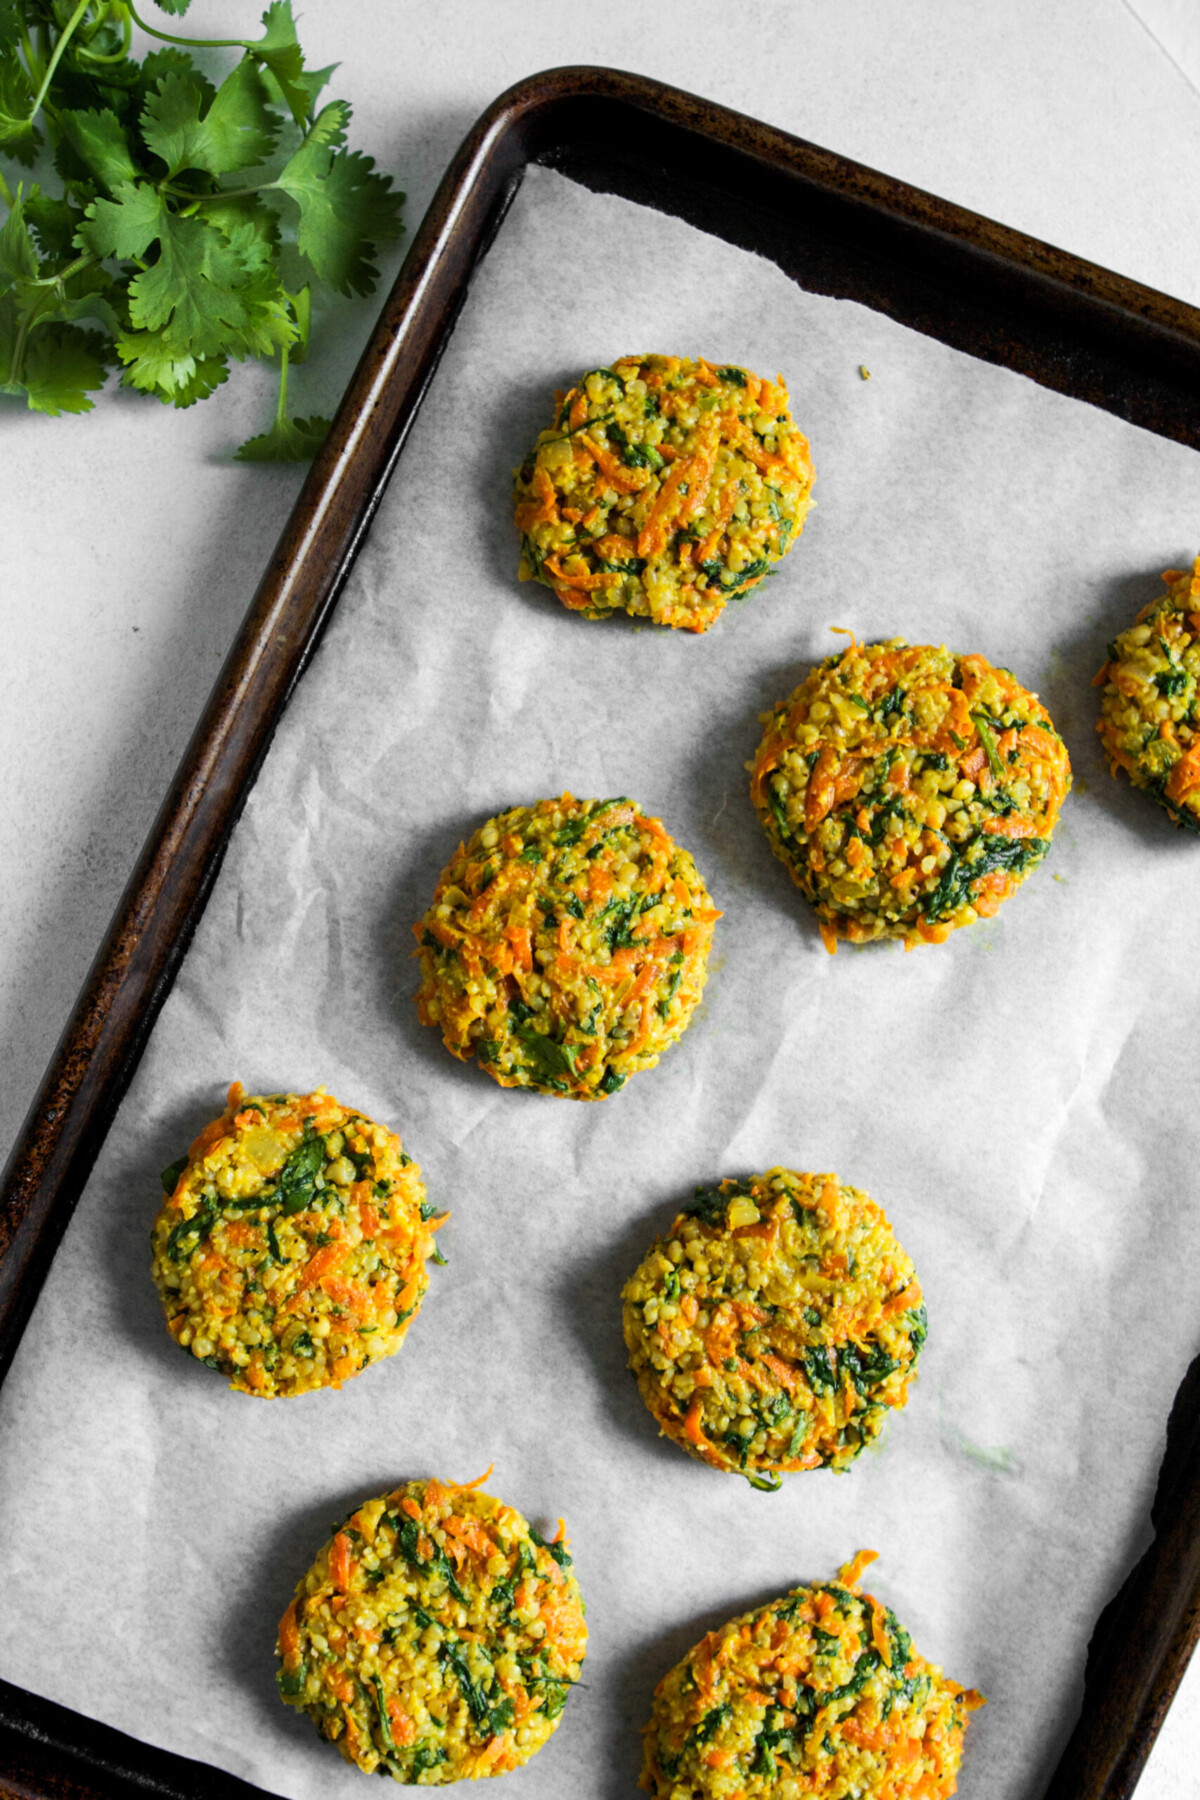 With a simple, yet impressive, ingredient list, these whole-grain sorghum cakes couldn’t be any easier to make. And when you throw carrots, arugula, curry, and a hearty amount of garlic into the mix, they also don’t lack any oomph. These Curried Sorghum Cakes are definitely weeknight-dinner fare. | Zestful Kitchen